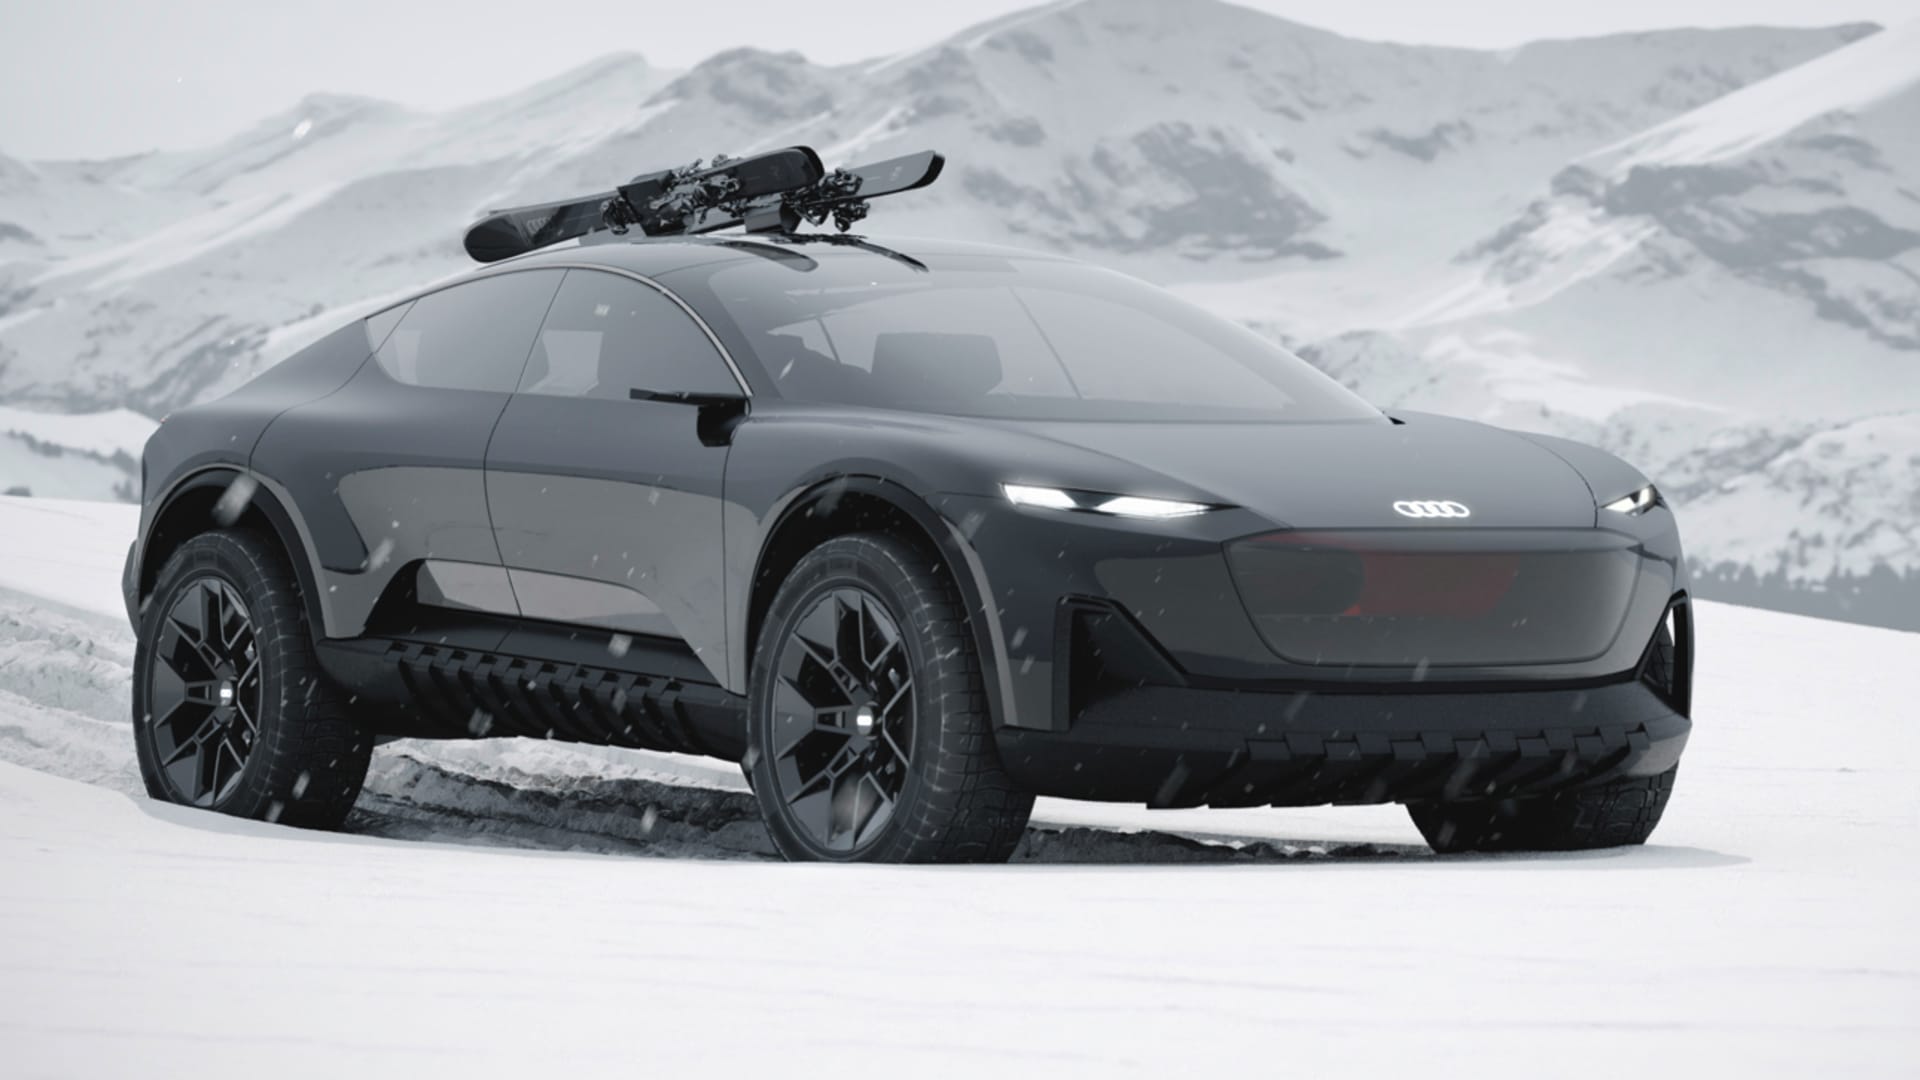 Audi’s new EV is a luxury SUV with augmented reality that doubles as a